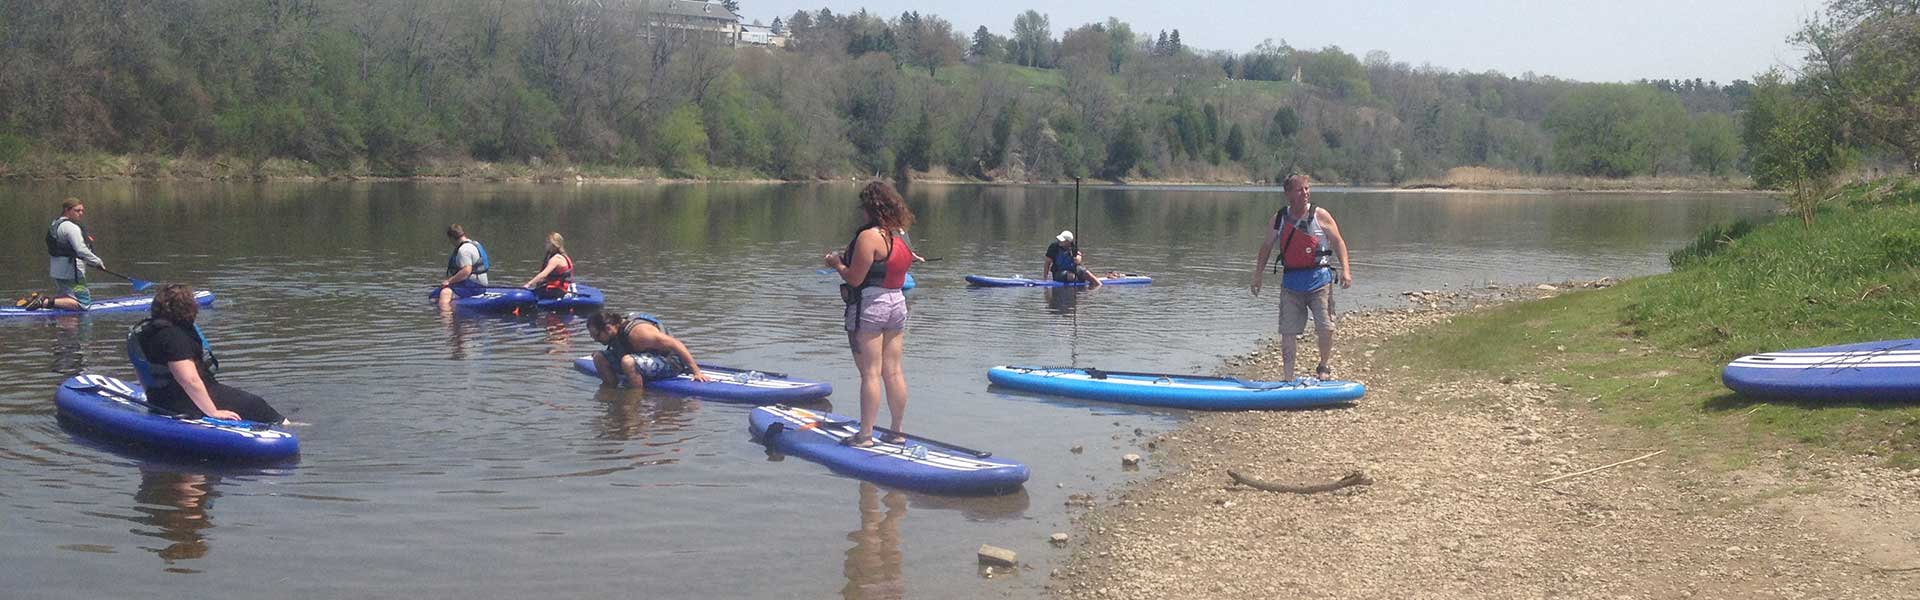 Stand Up Paddle Boarding and Rentals in Ontario